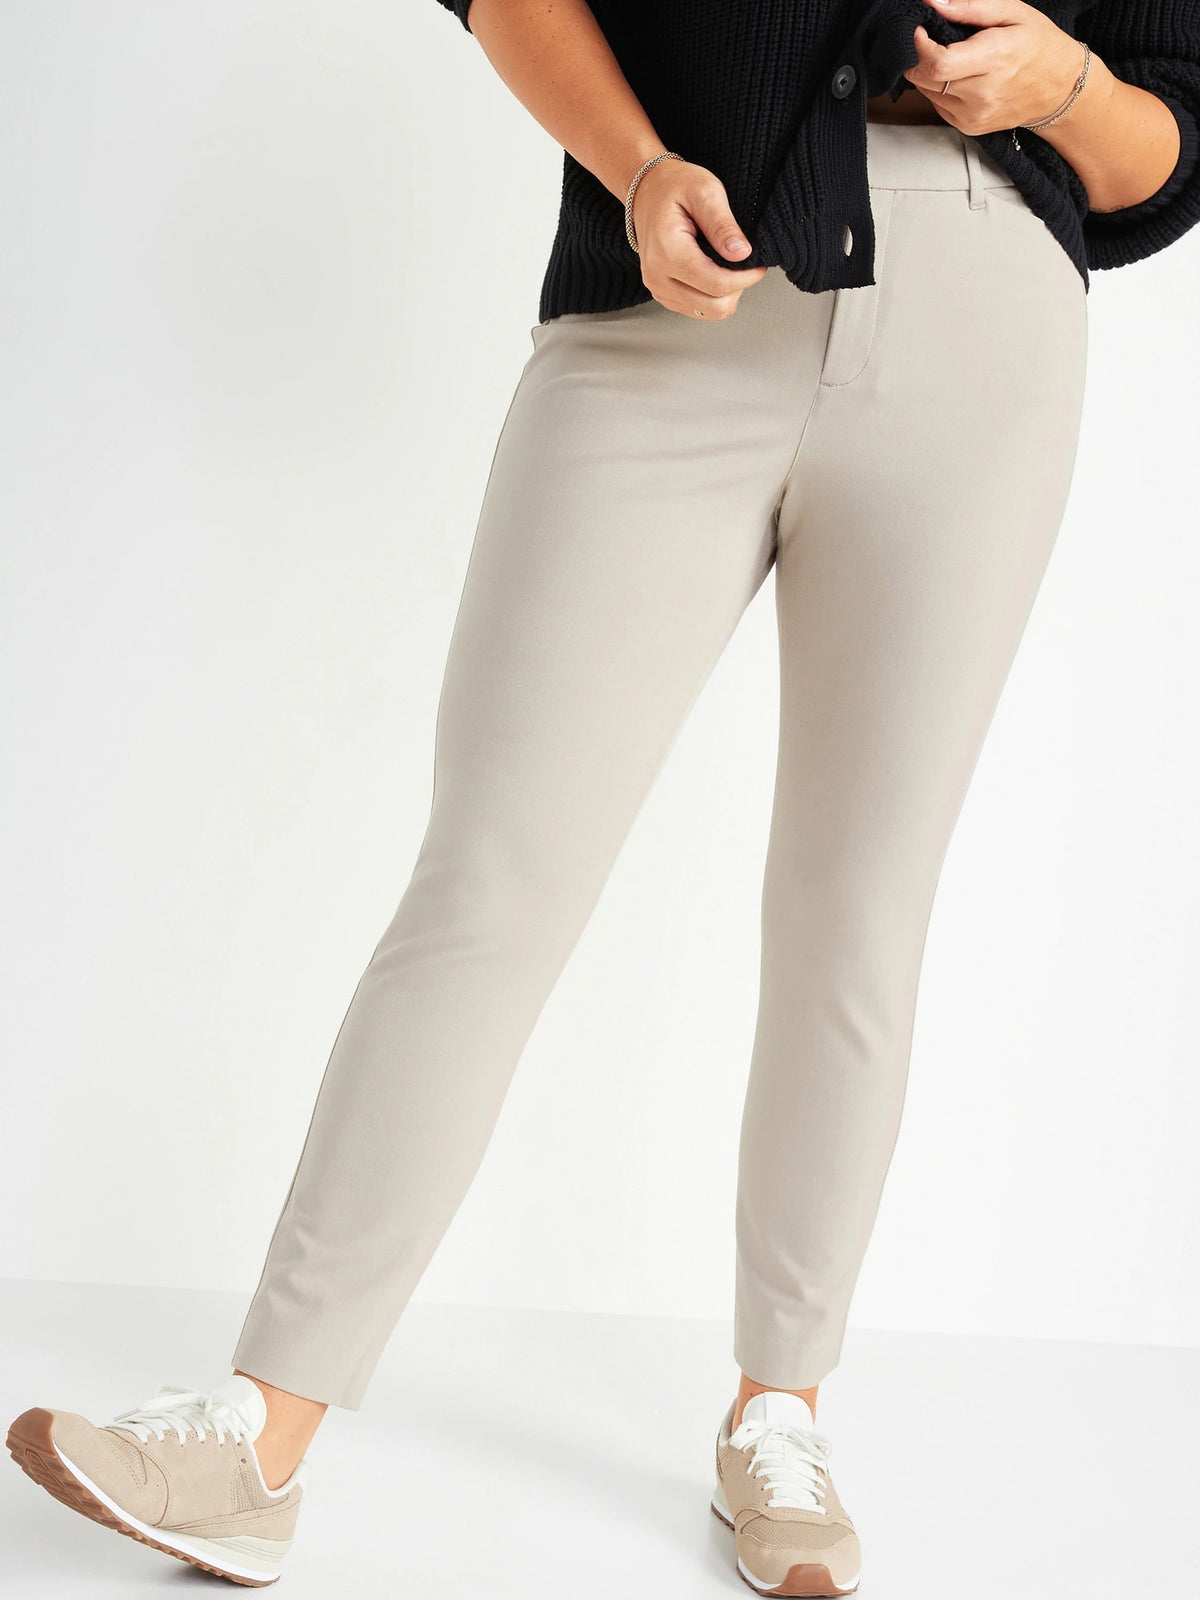 High-Waisted Never-Fade Pixie Ankle Pants for Women - Old Navy